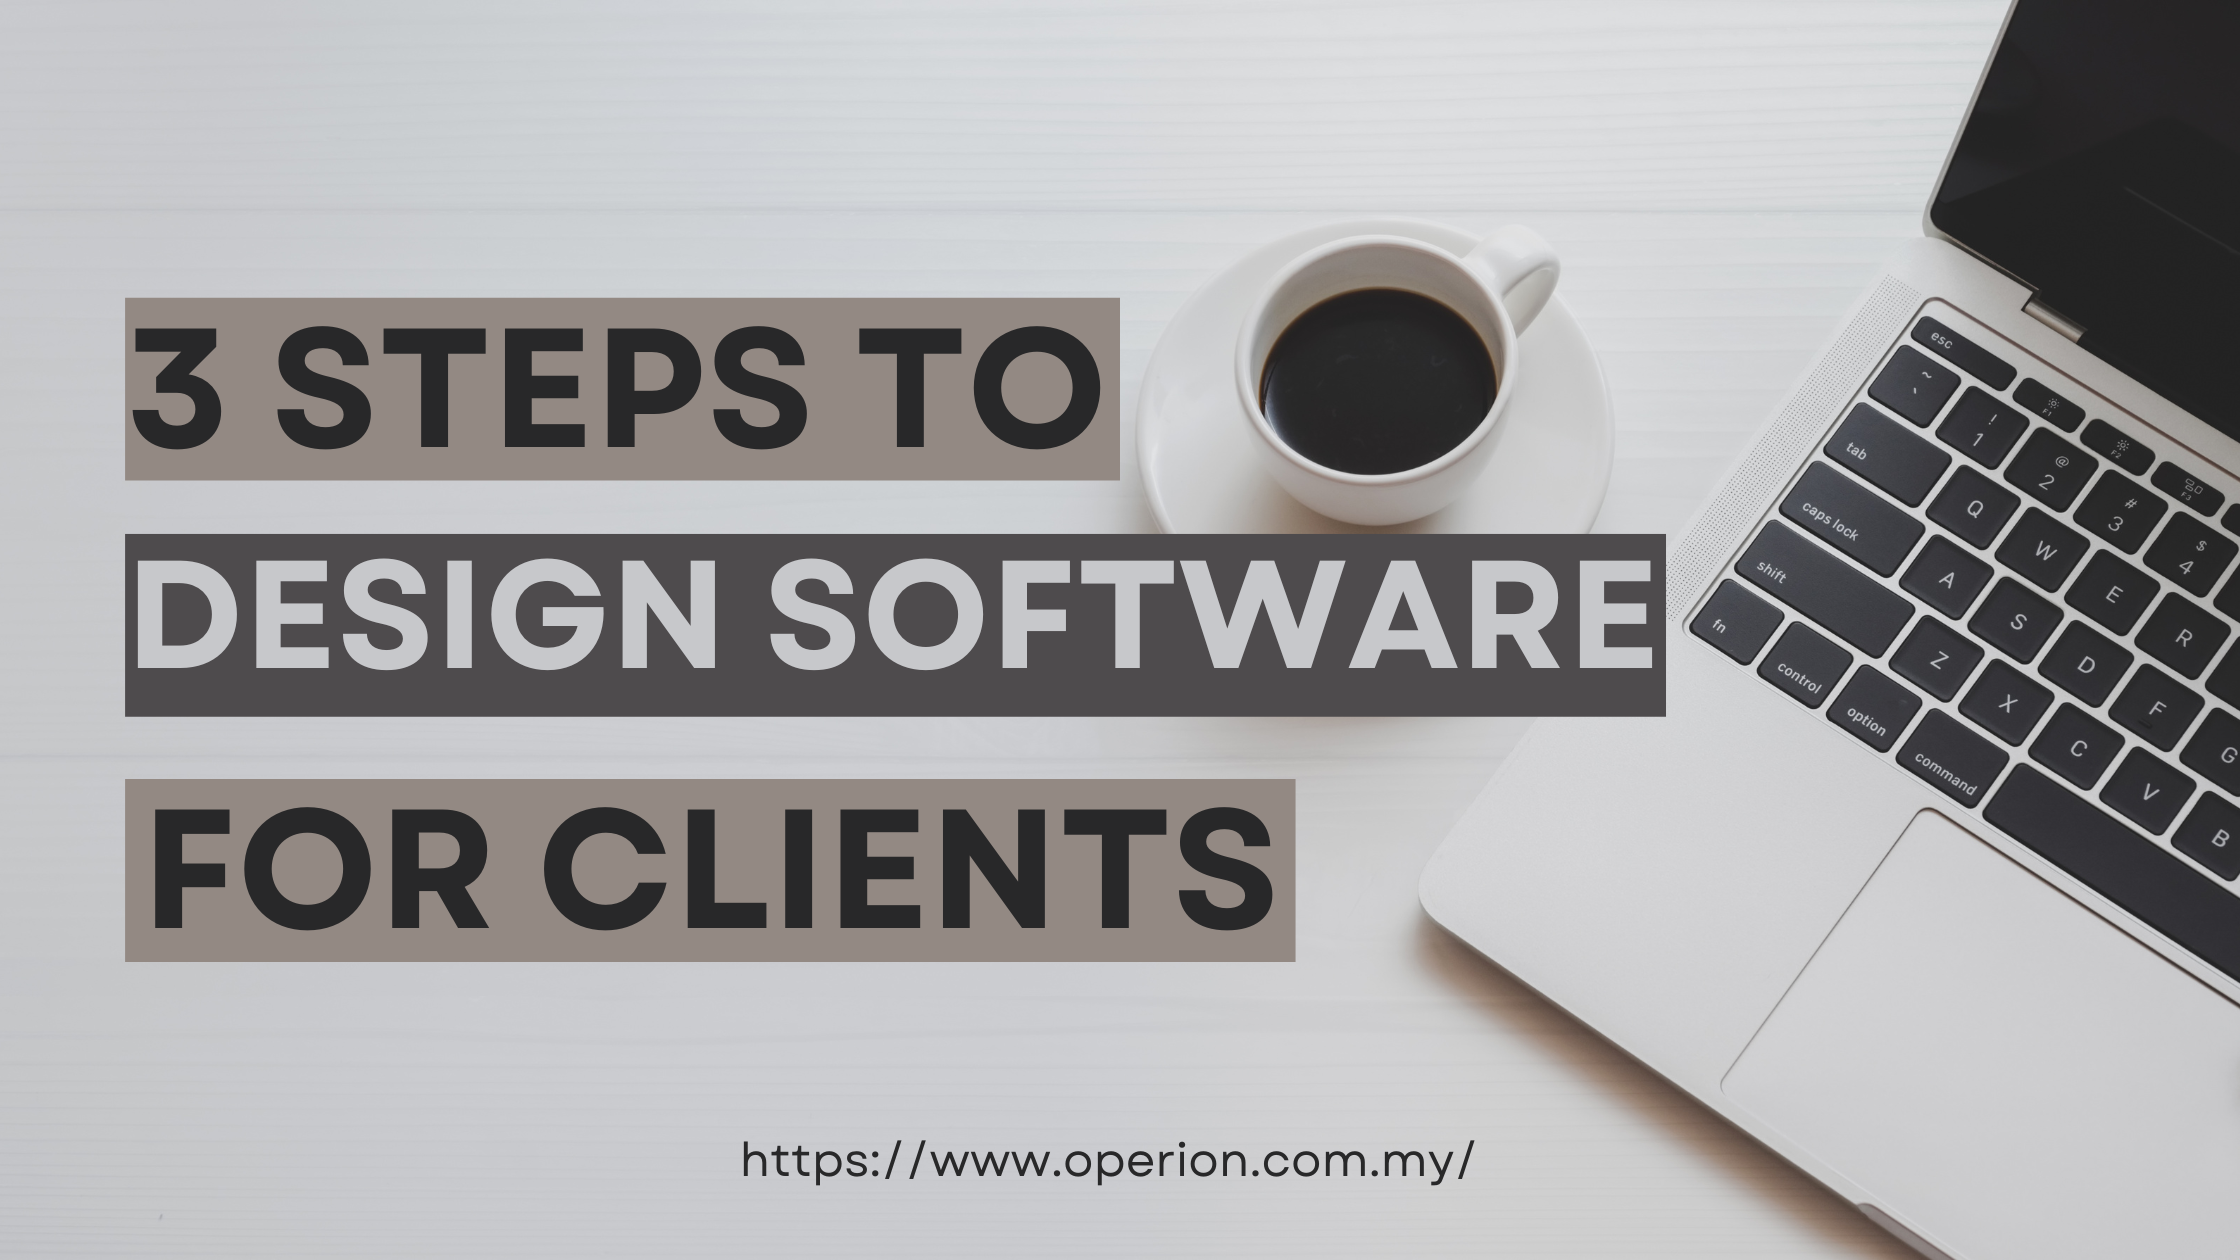 How Can You Design Software that Perfectly Fits Your Client’s Needs in Just 3 Steps?